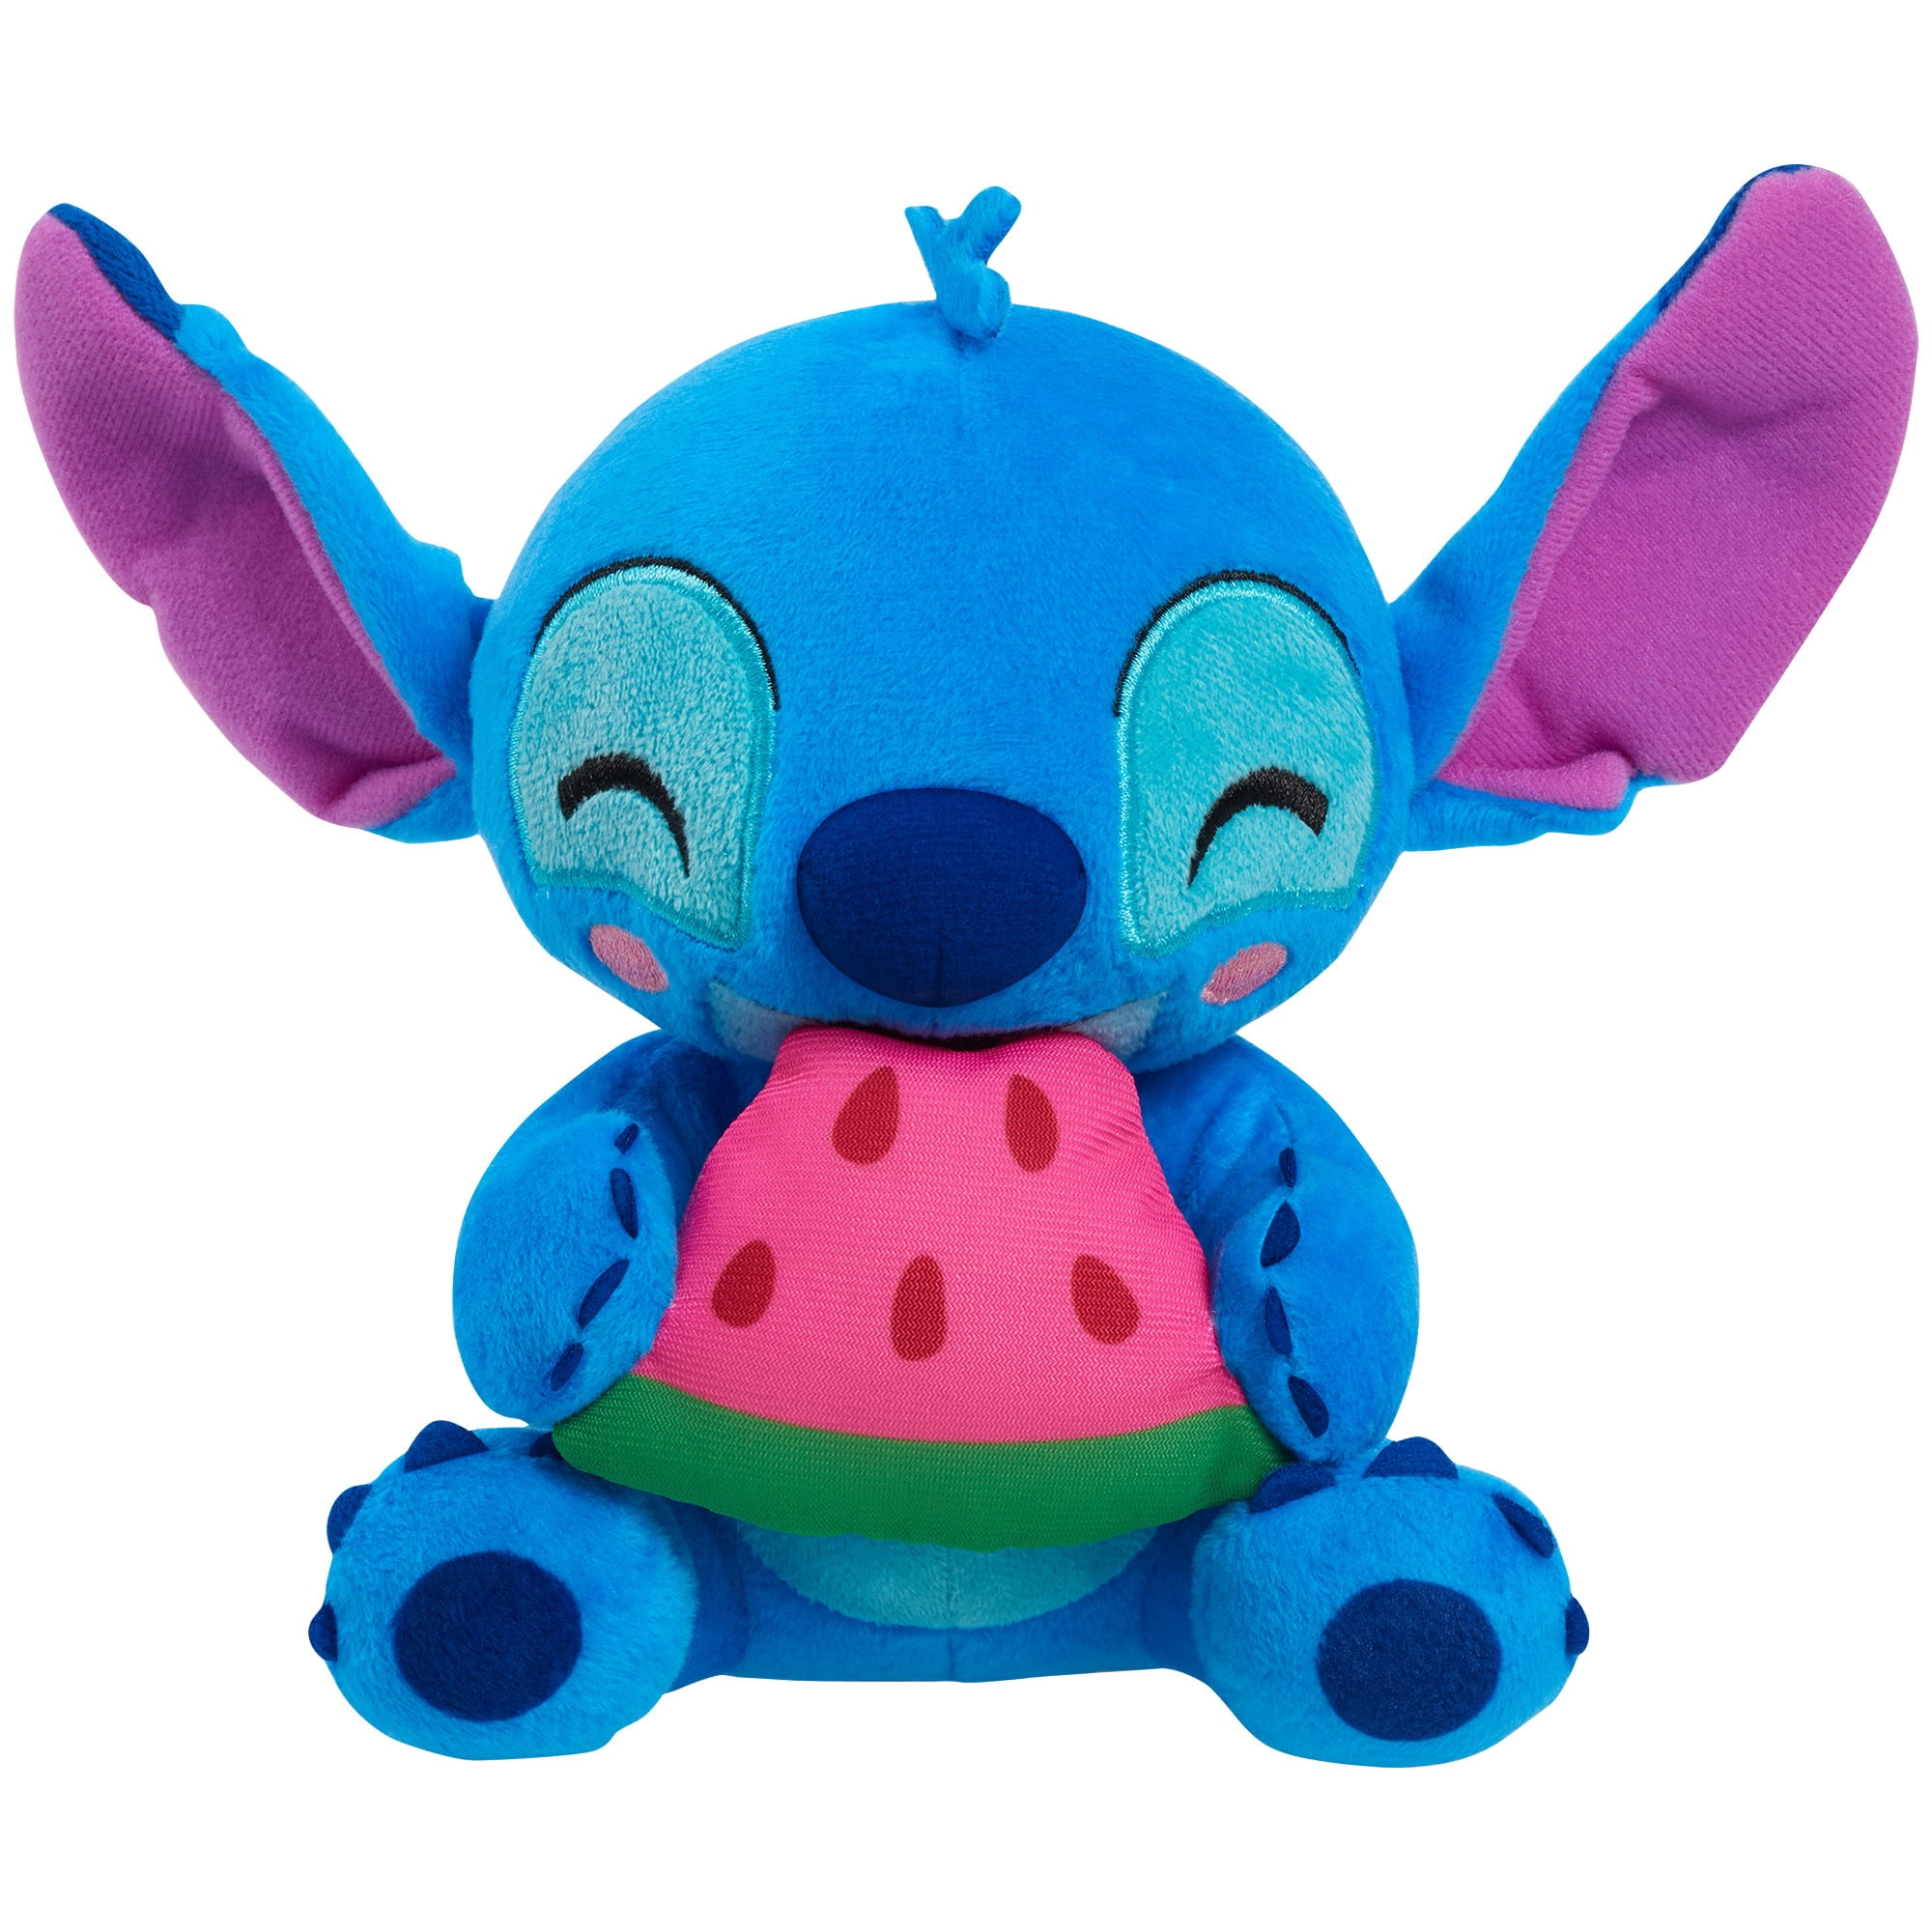 Disney Stitch Small Plush Stitch and Watermelon, Stuffed Animal, Blue,  Alien, Officially Licensed Kids Toys for Ages 2 Up, Easter Basket Stuffers  and